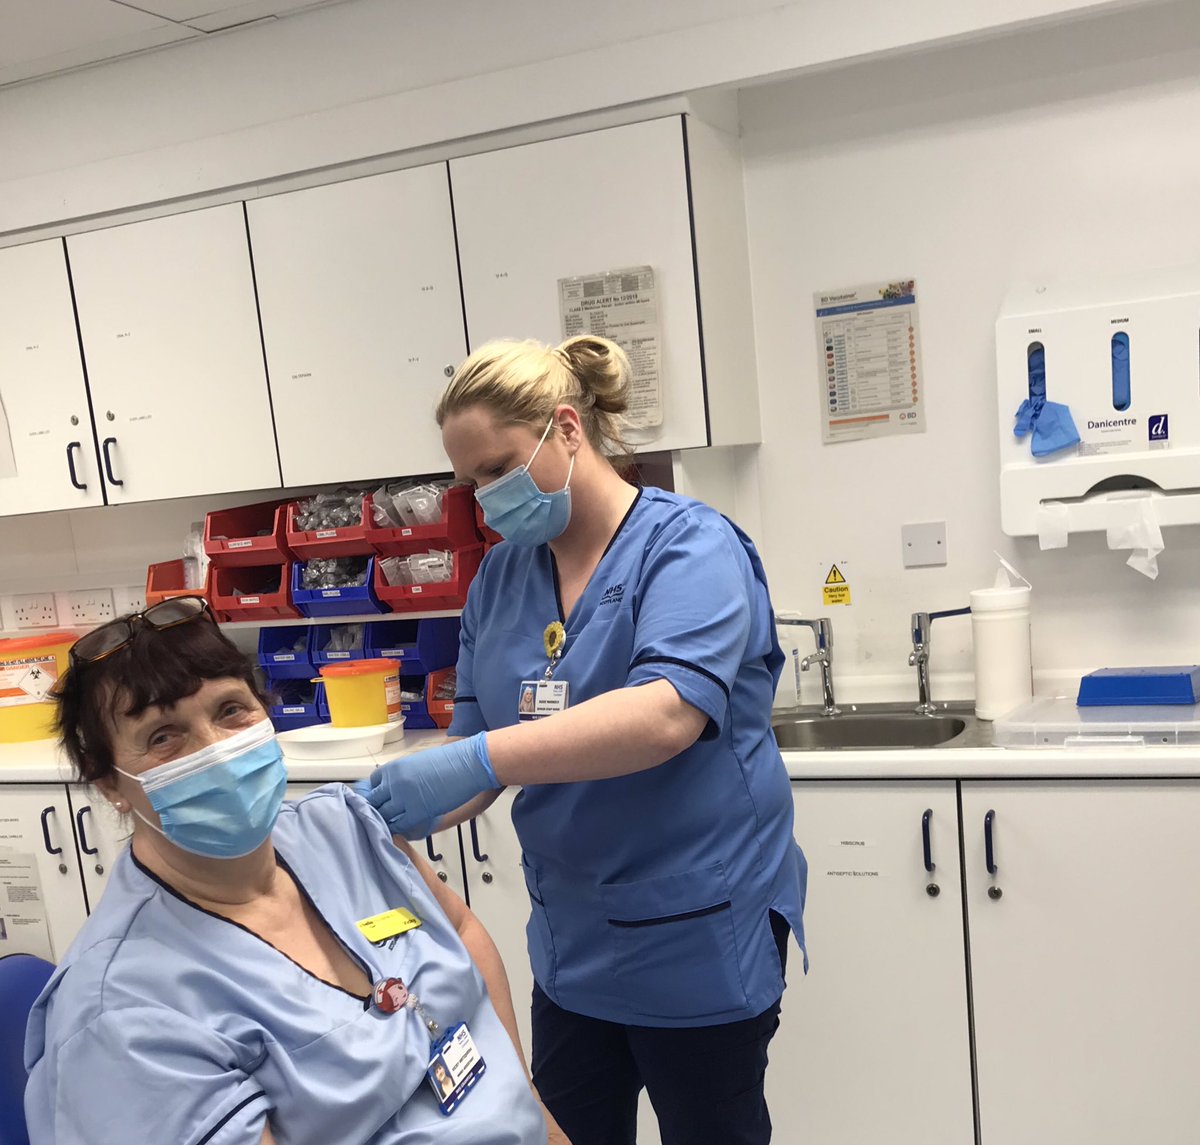 Peer vaccination underway in ward 206/207, with 6 of us having completed our training. Already awaiting more stock so please don’t stampede! (Permission given for photo) #flujab #peervaccination @NHSGrampian